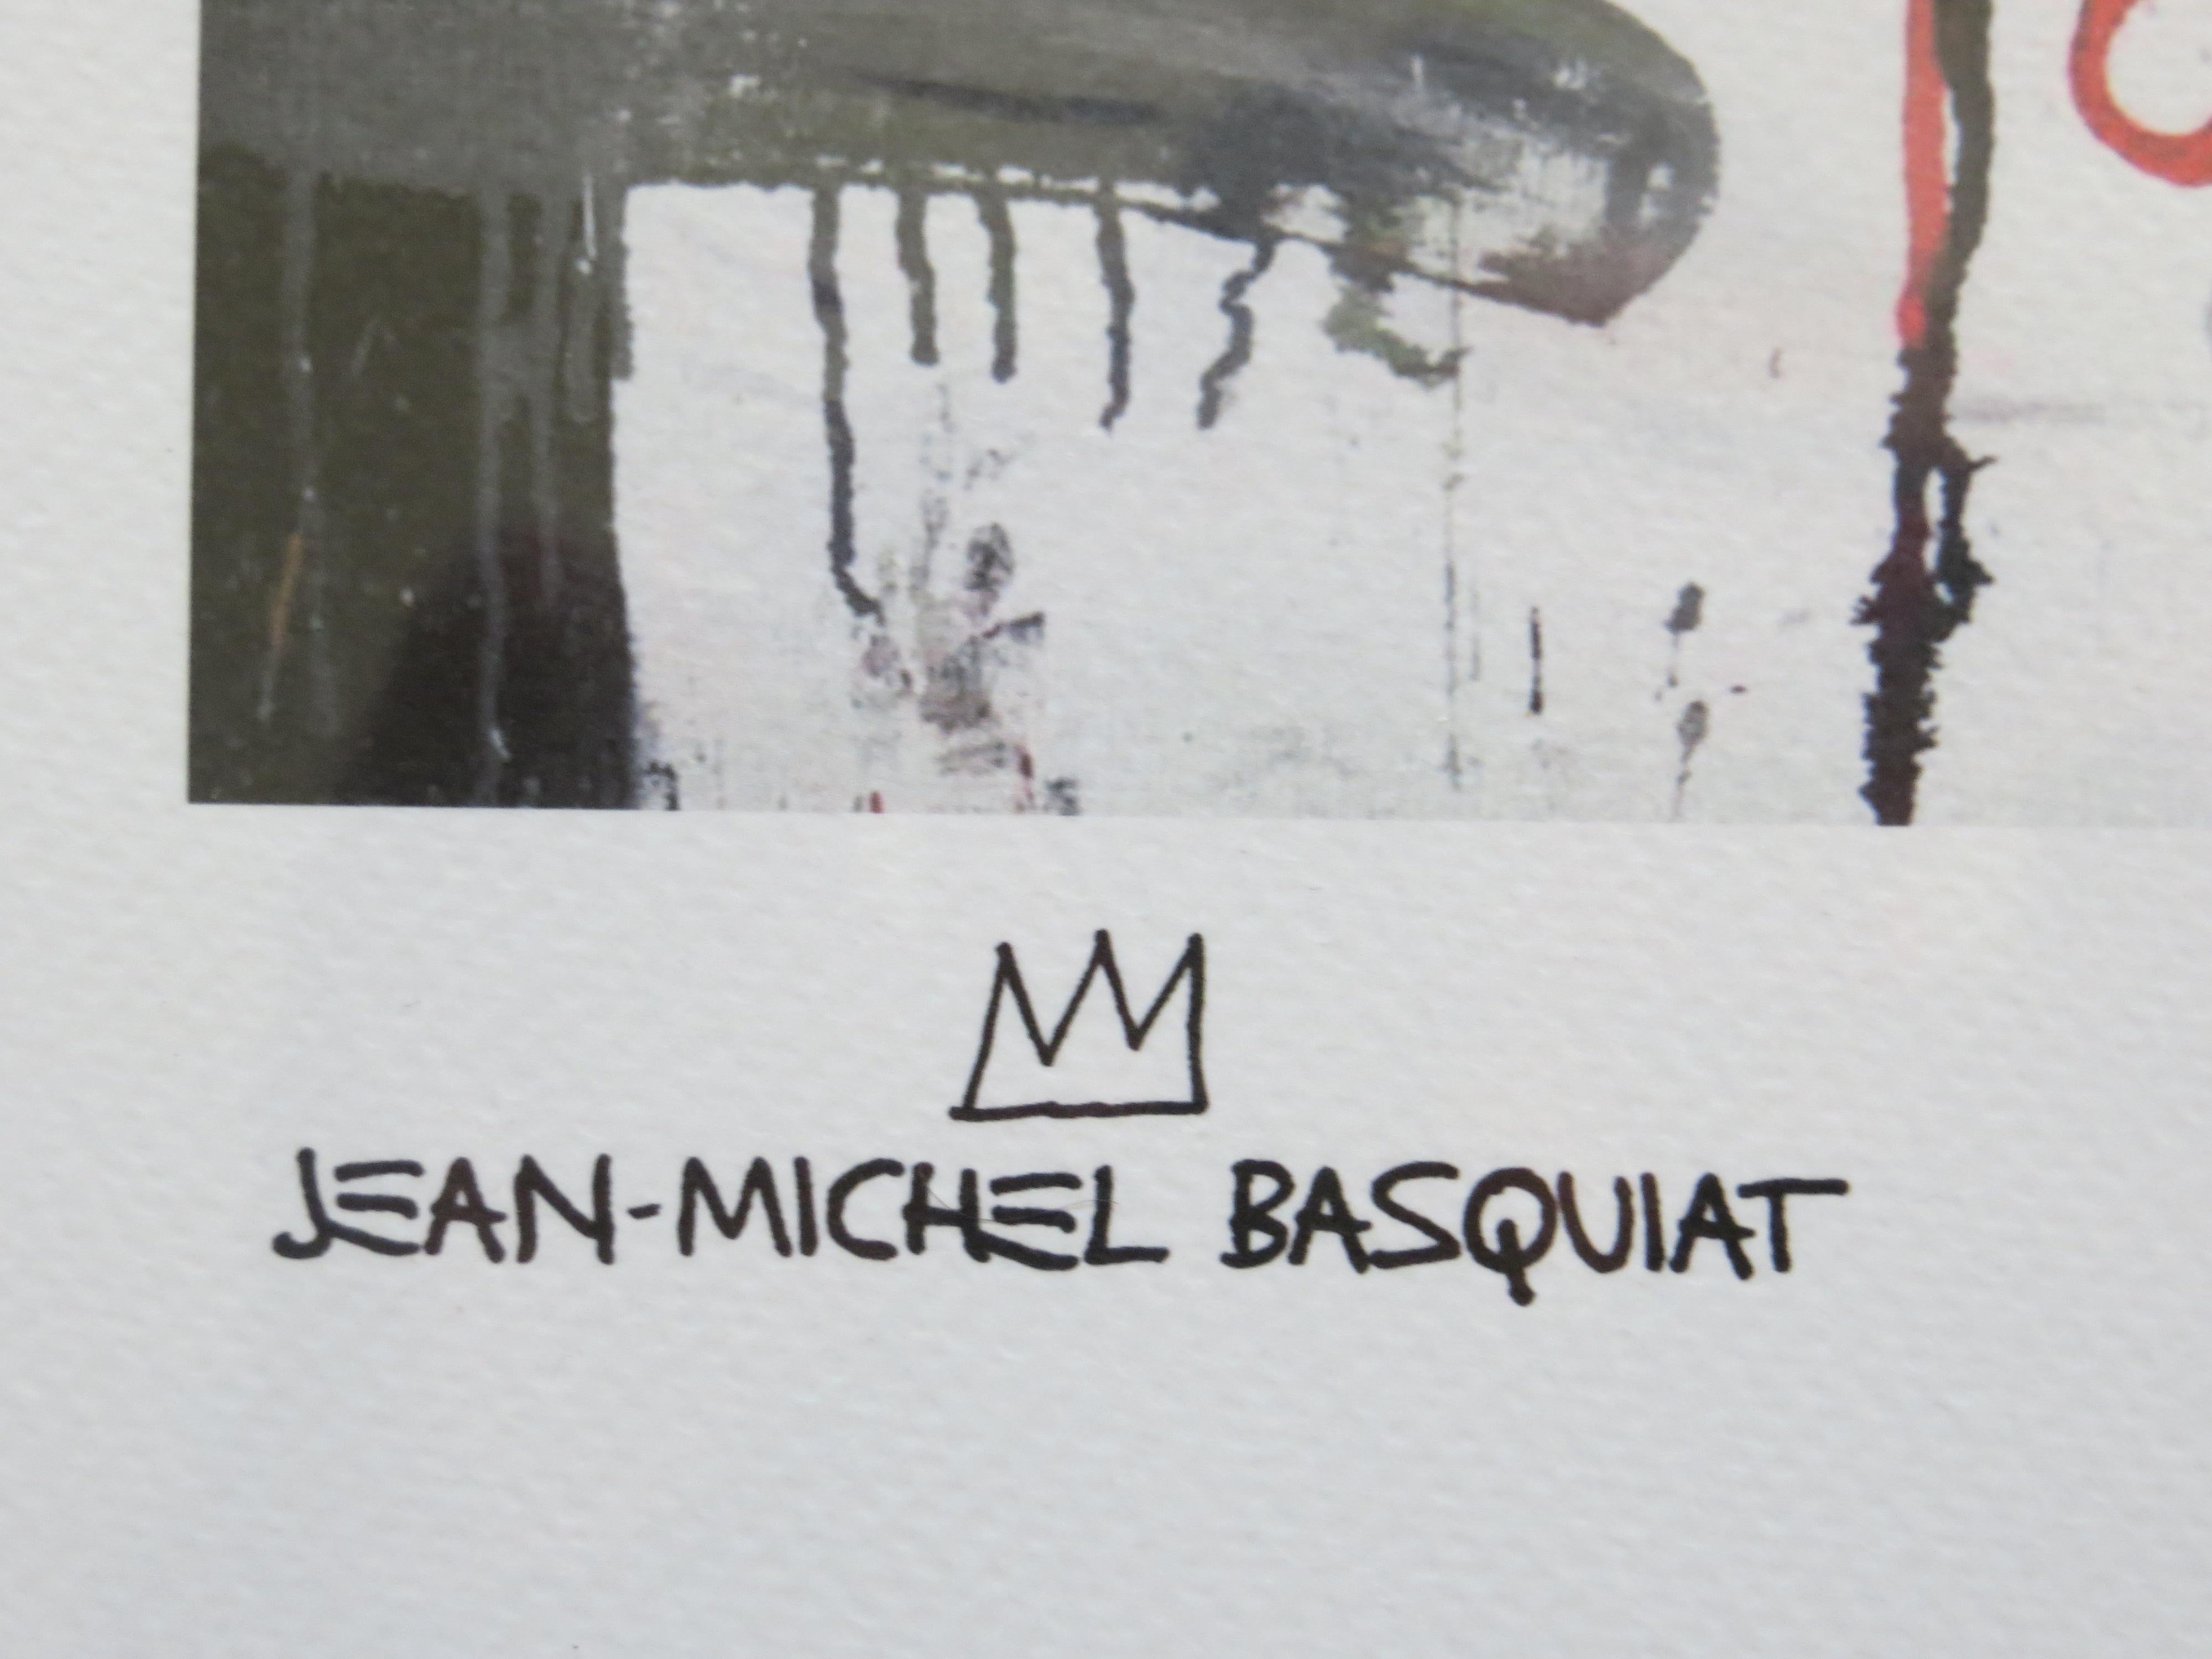 The Estate of Jean-Michel Basquiat,  Lithograph   57  /300 - Print by after Jean-Michel Basquiat